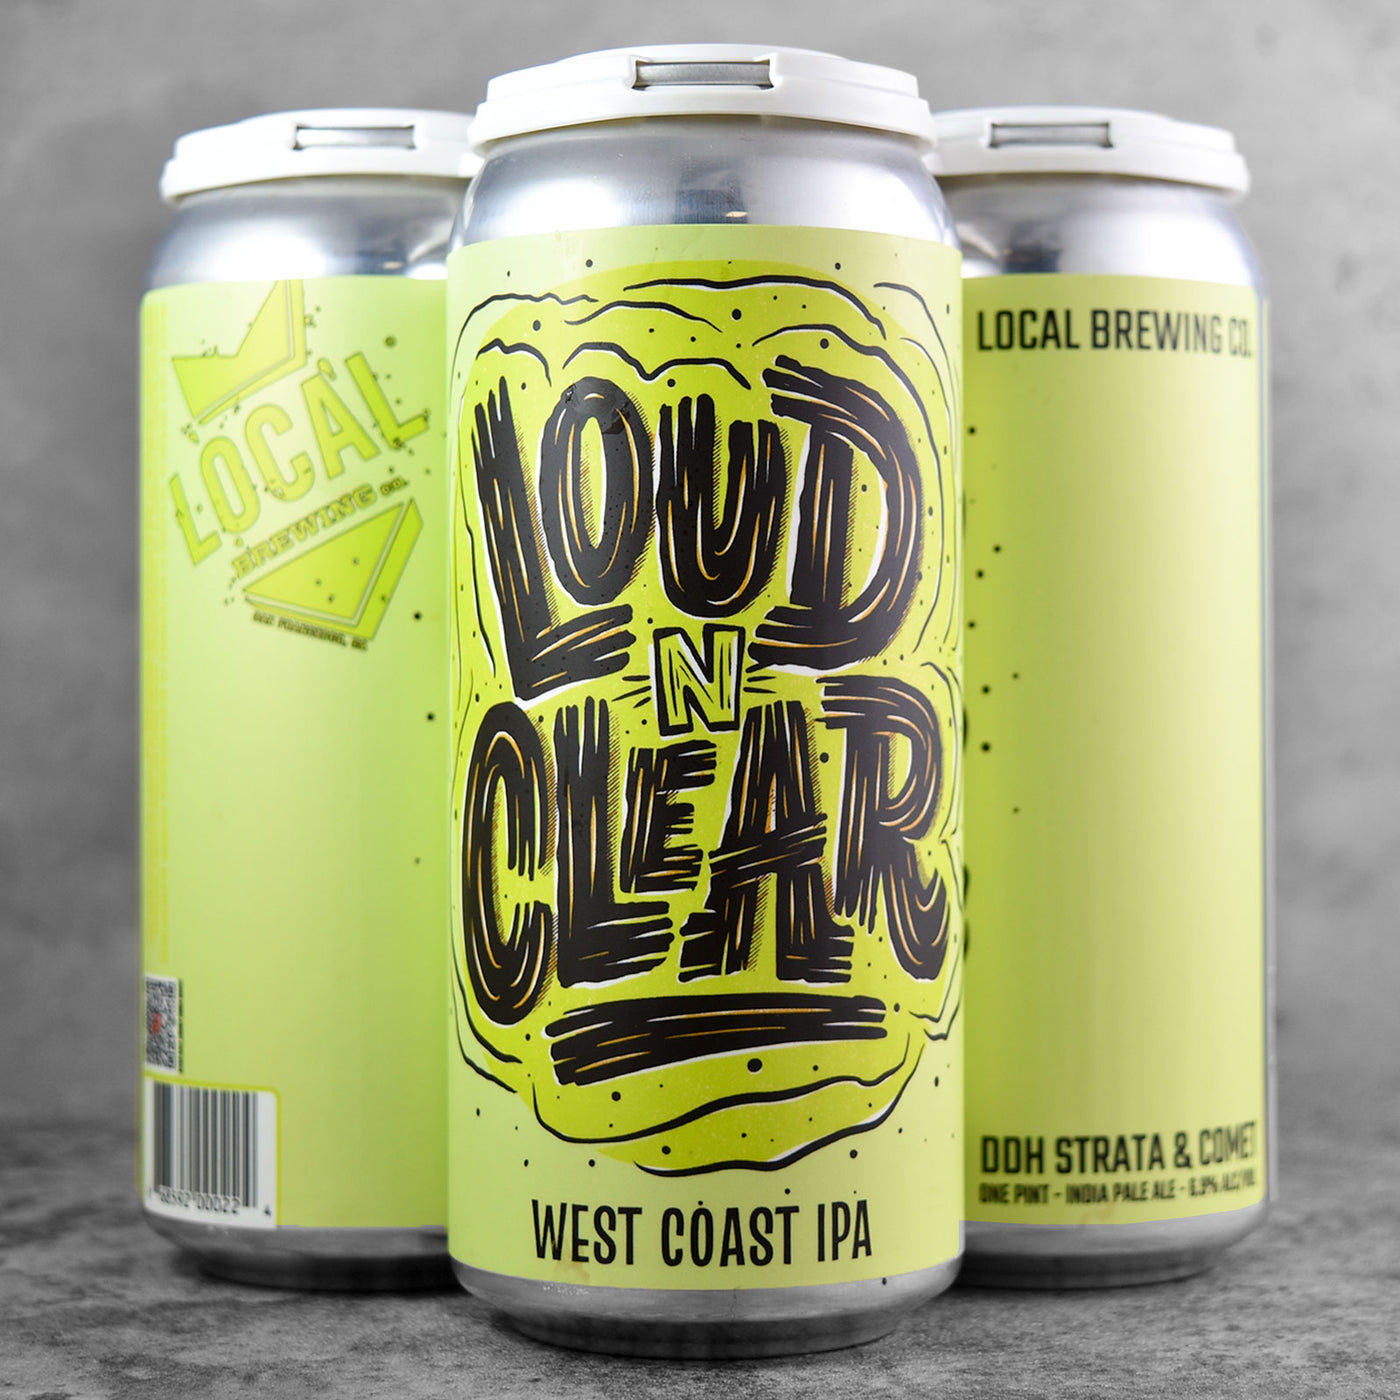 Local Brewing Co. Loud N Clear